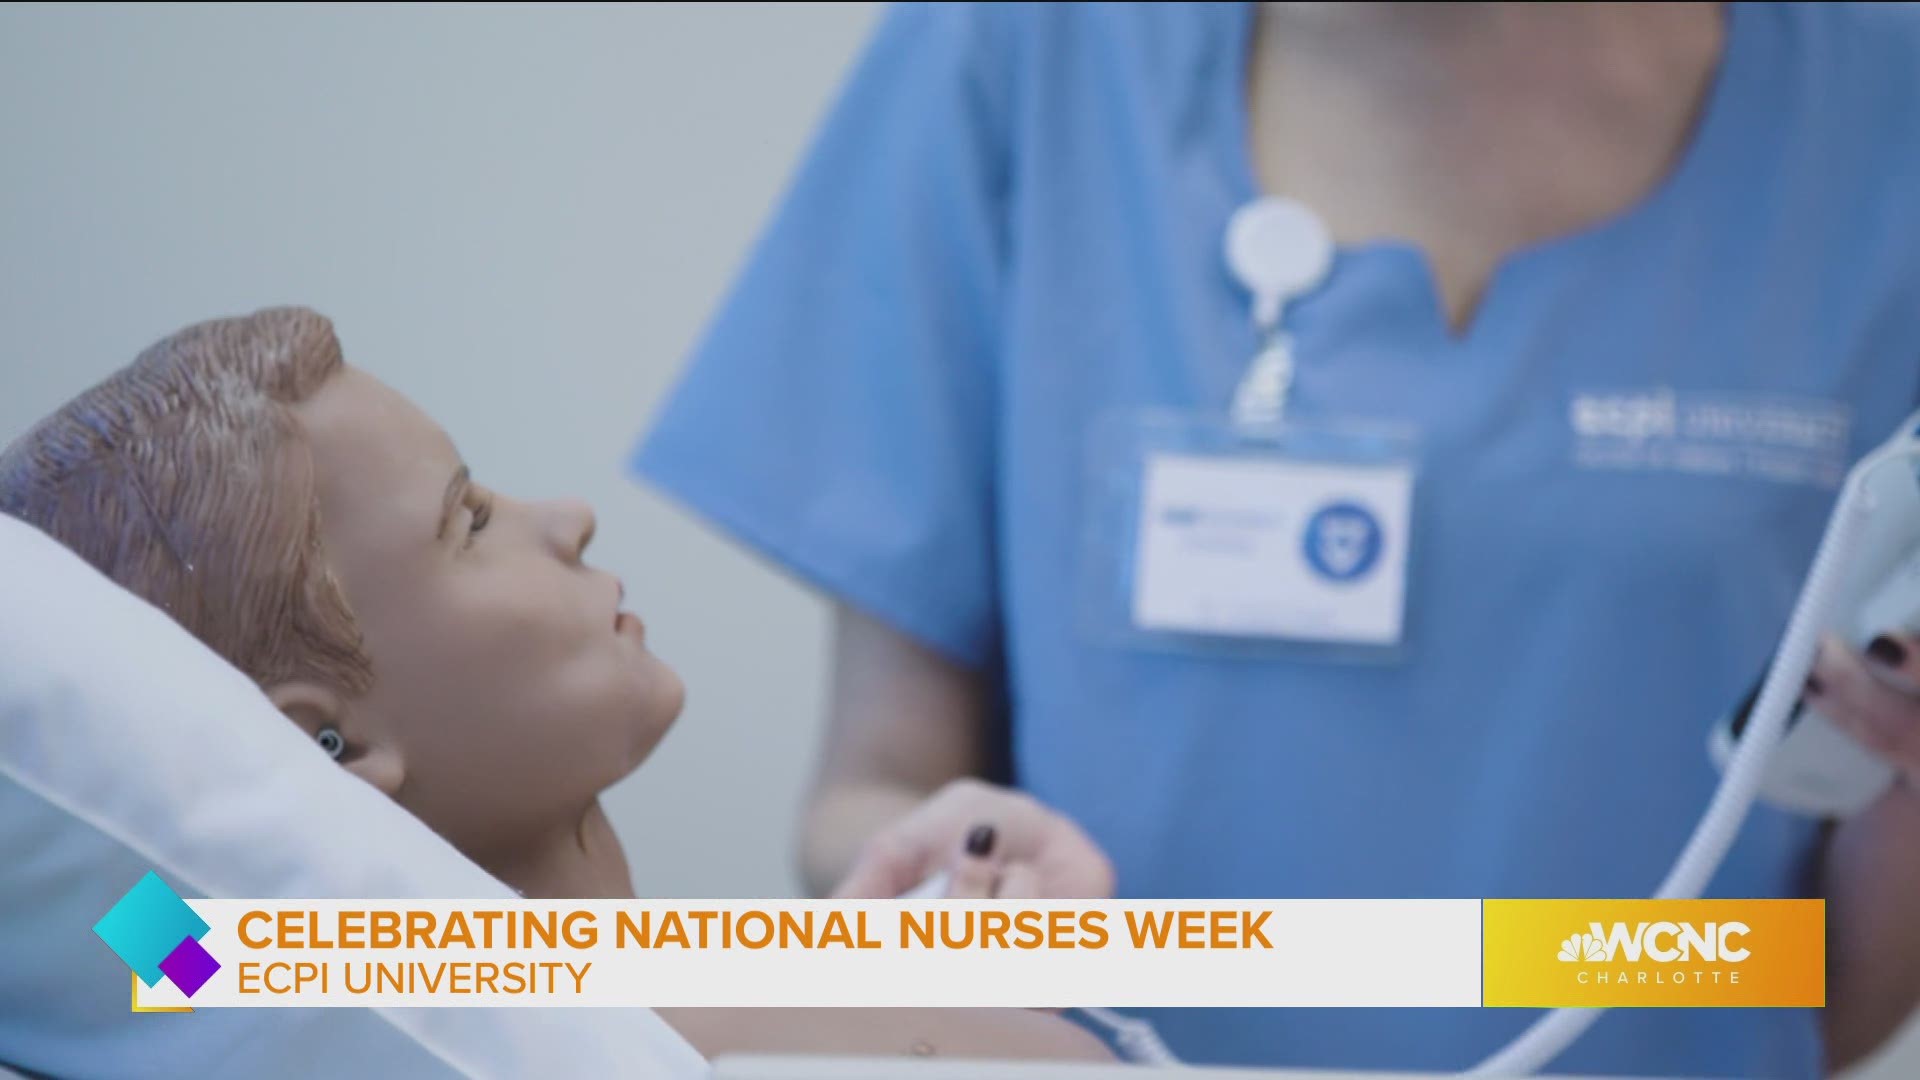 Find out how to start a rewarding career in nursing